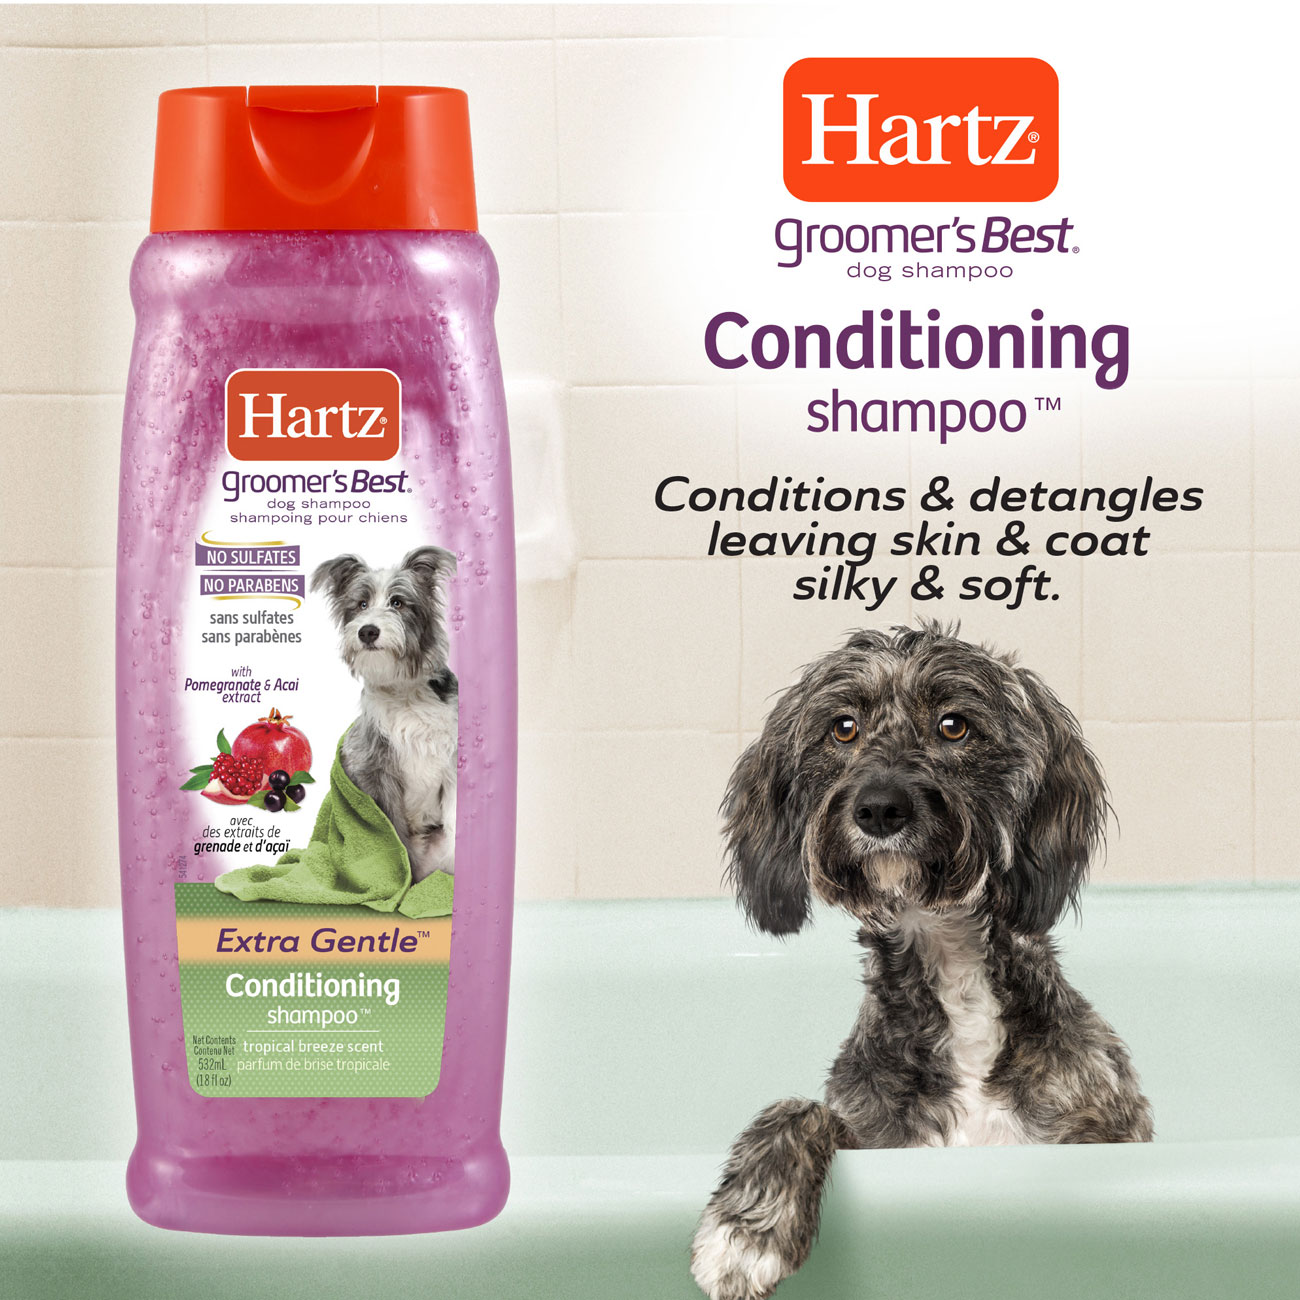 Hartz groomers best conditioning shampoo for dogs. Conditions and detangles leaving skin and coat silky and soft.